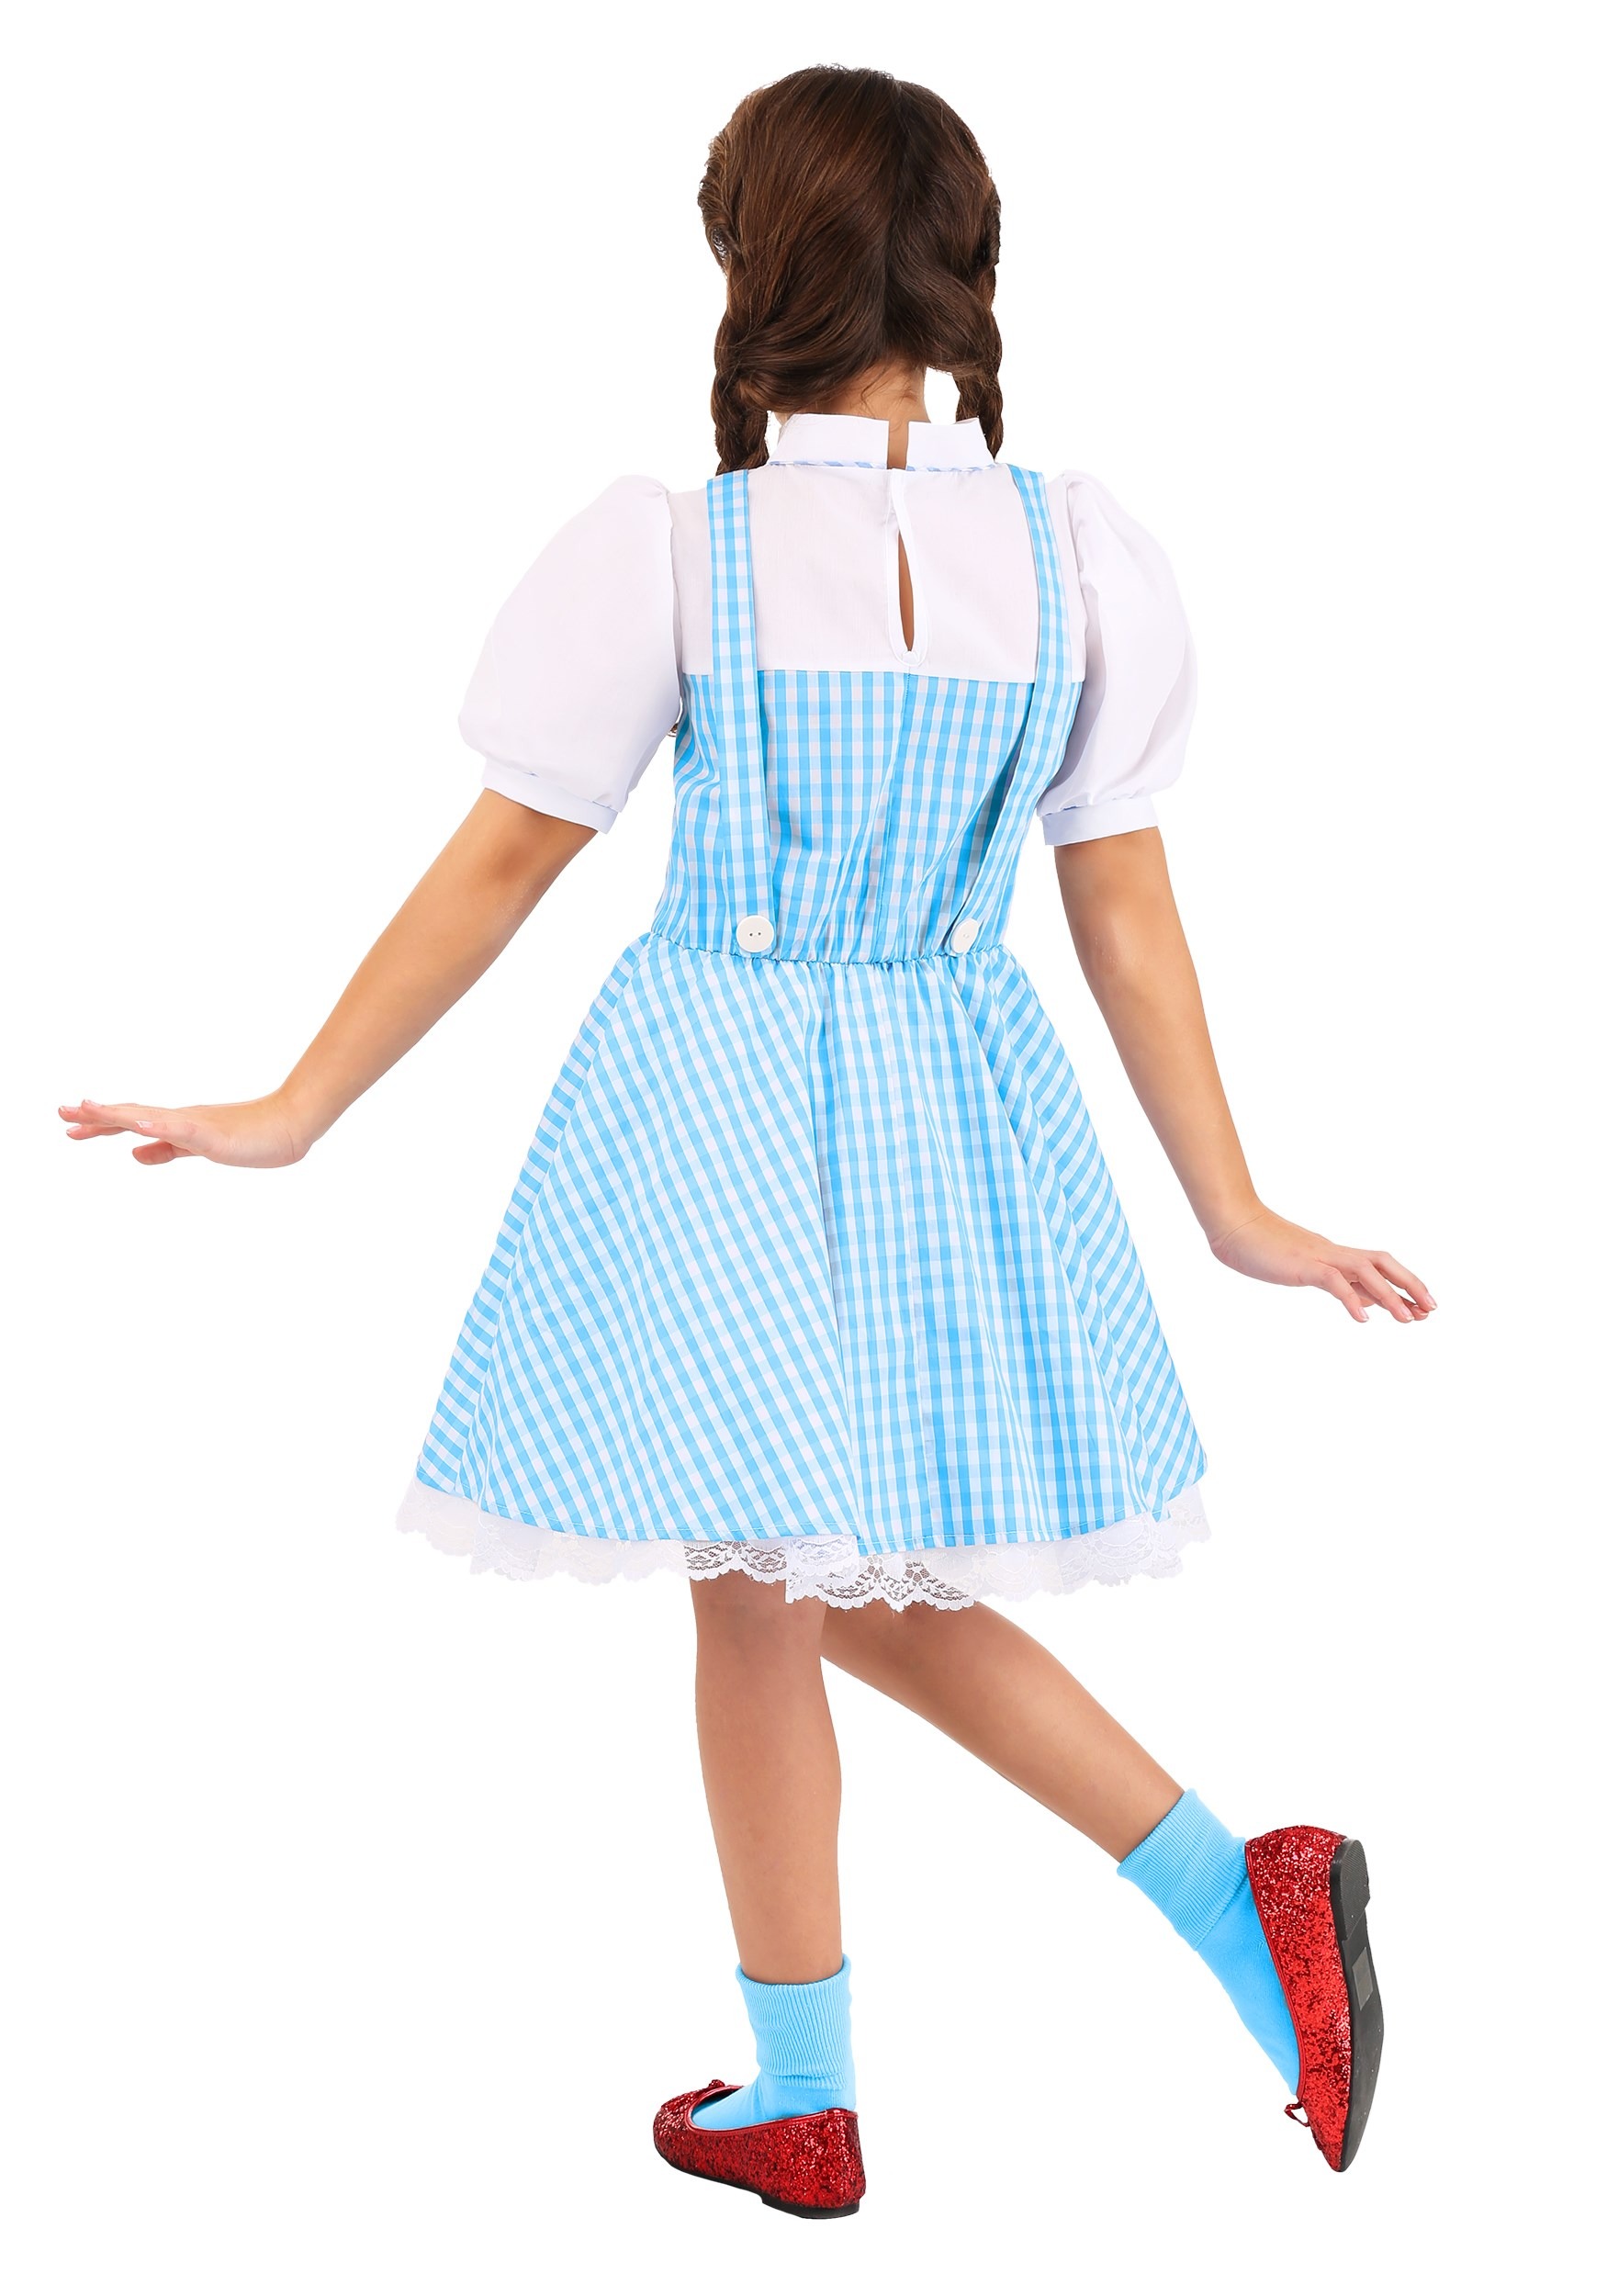 Wizard of Oz Dorothy Sequin Costume Toddler 12 75th Anniversary Edition for sale online